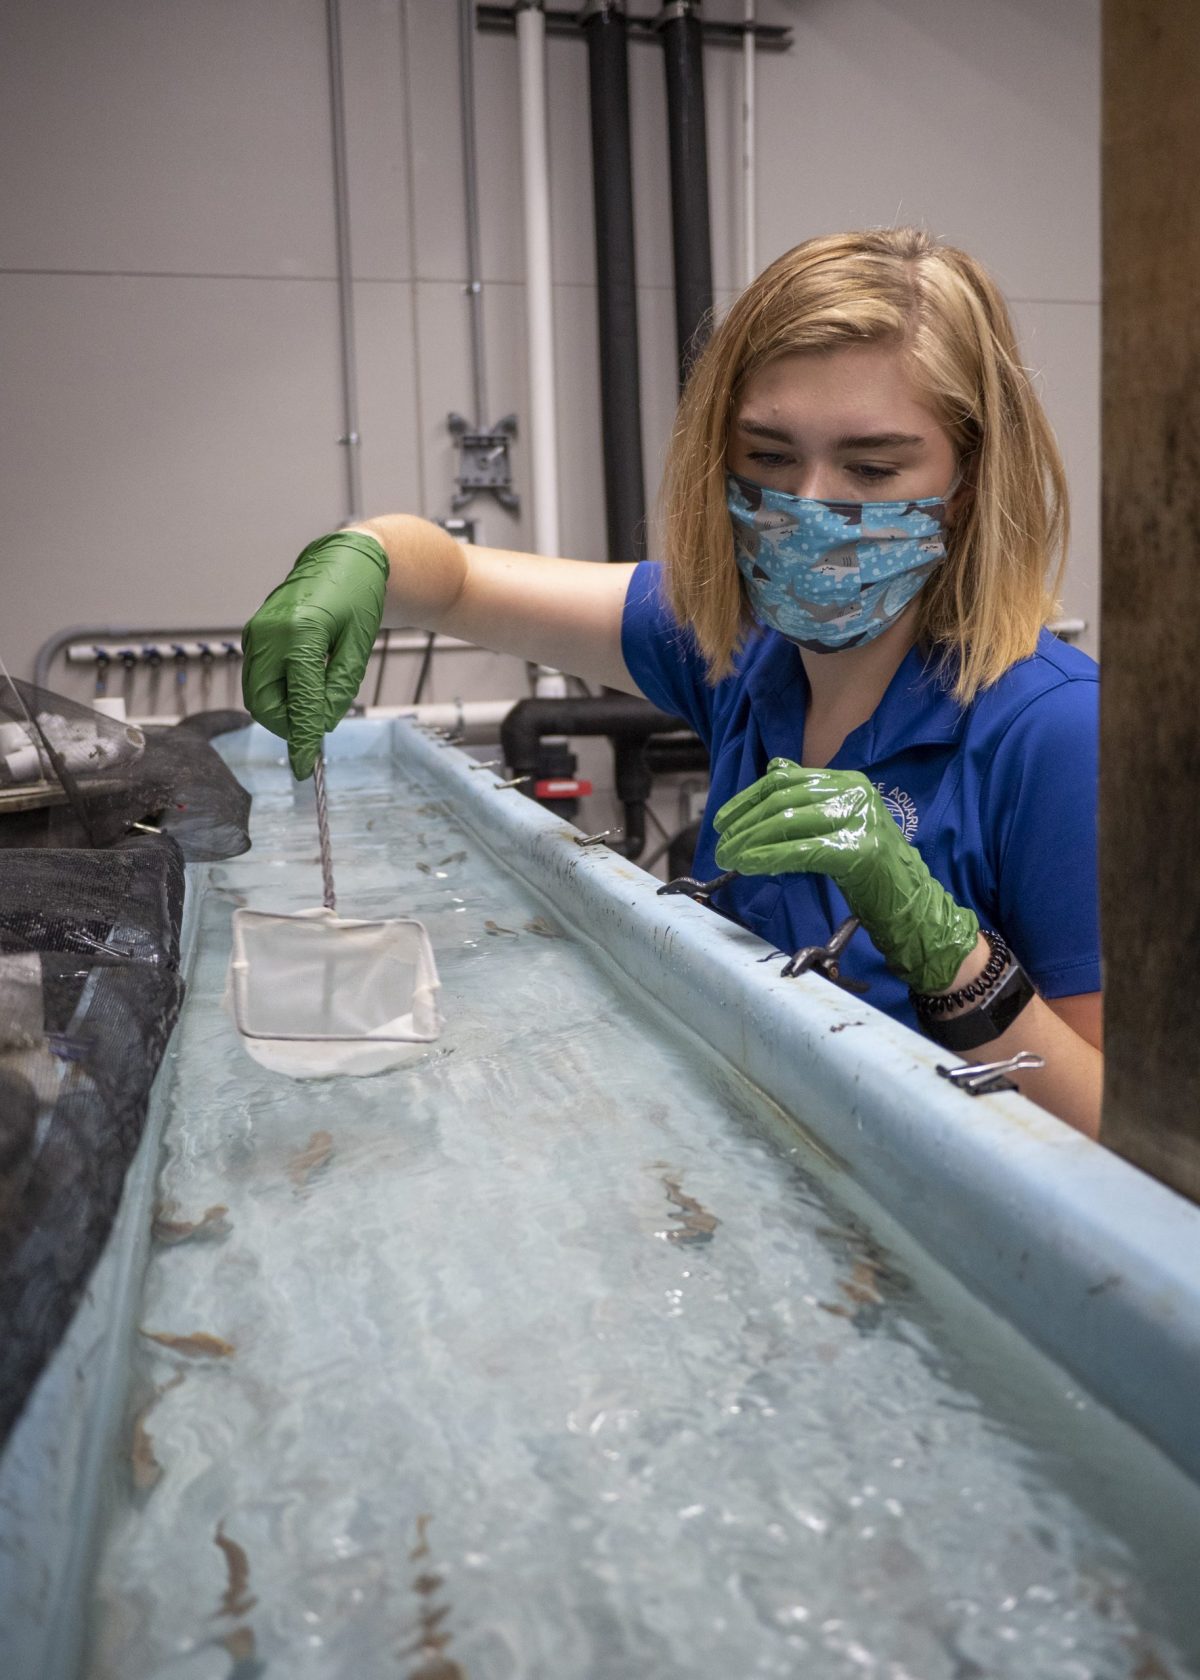 Reintroduction Assistant Anna Quintrell fishes juvenile Southern Appalachian Brook Trout from fish runs at the Tennessee Aquarium Conservation Institute